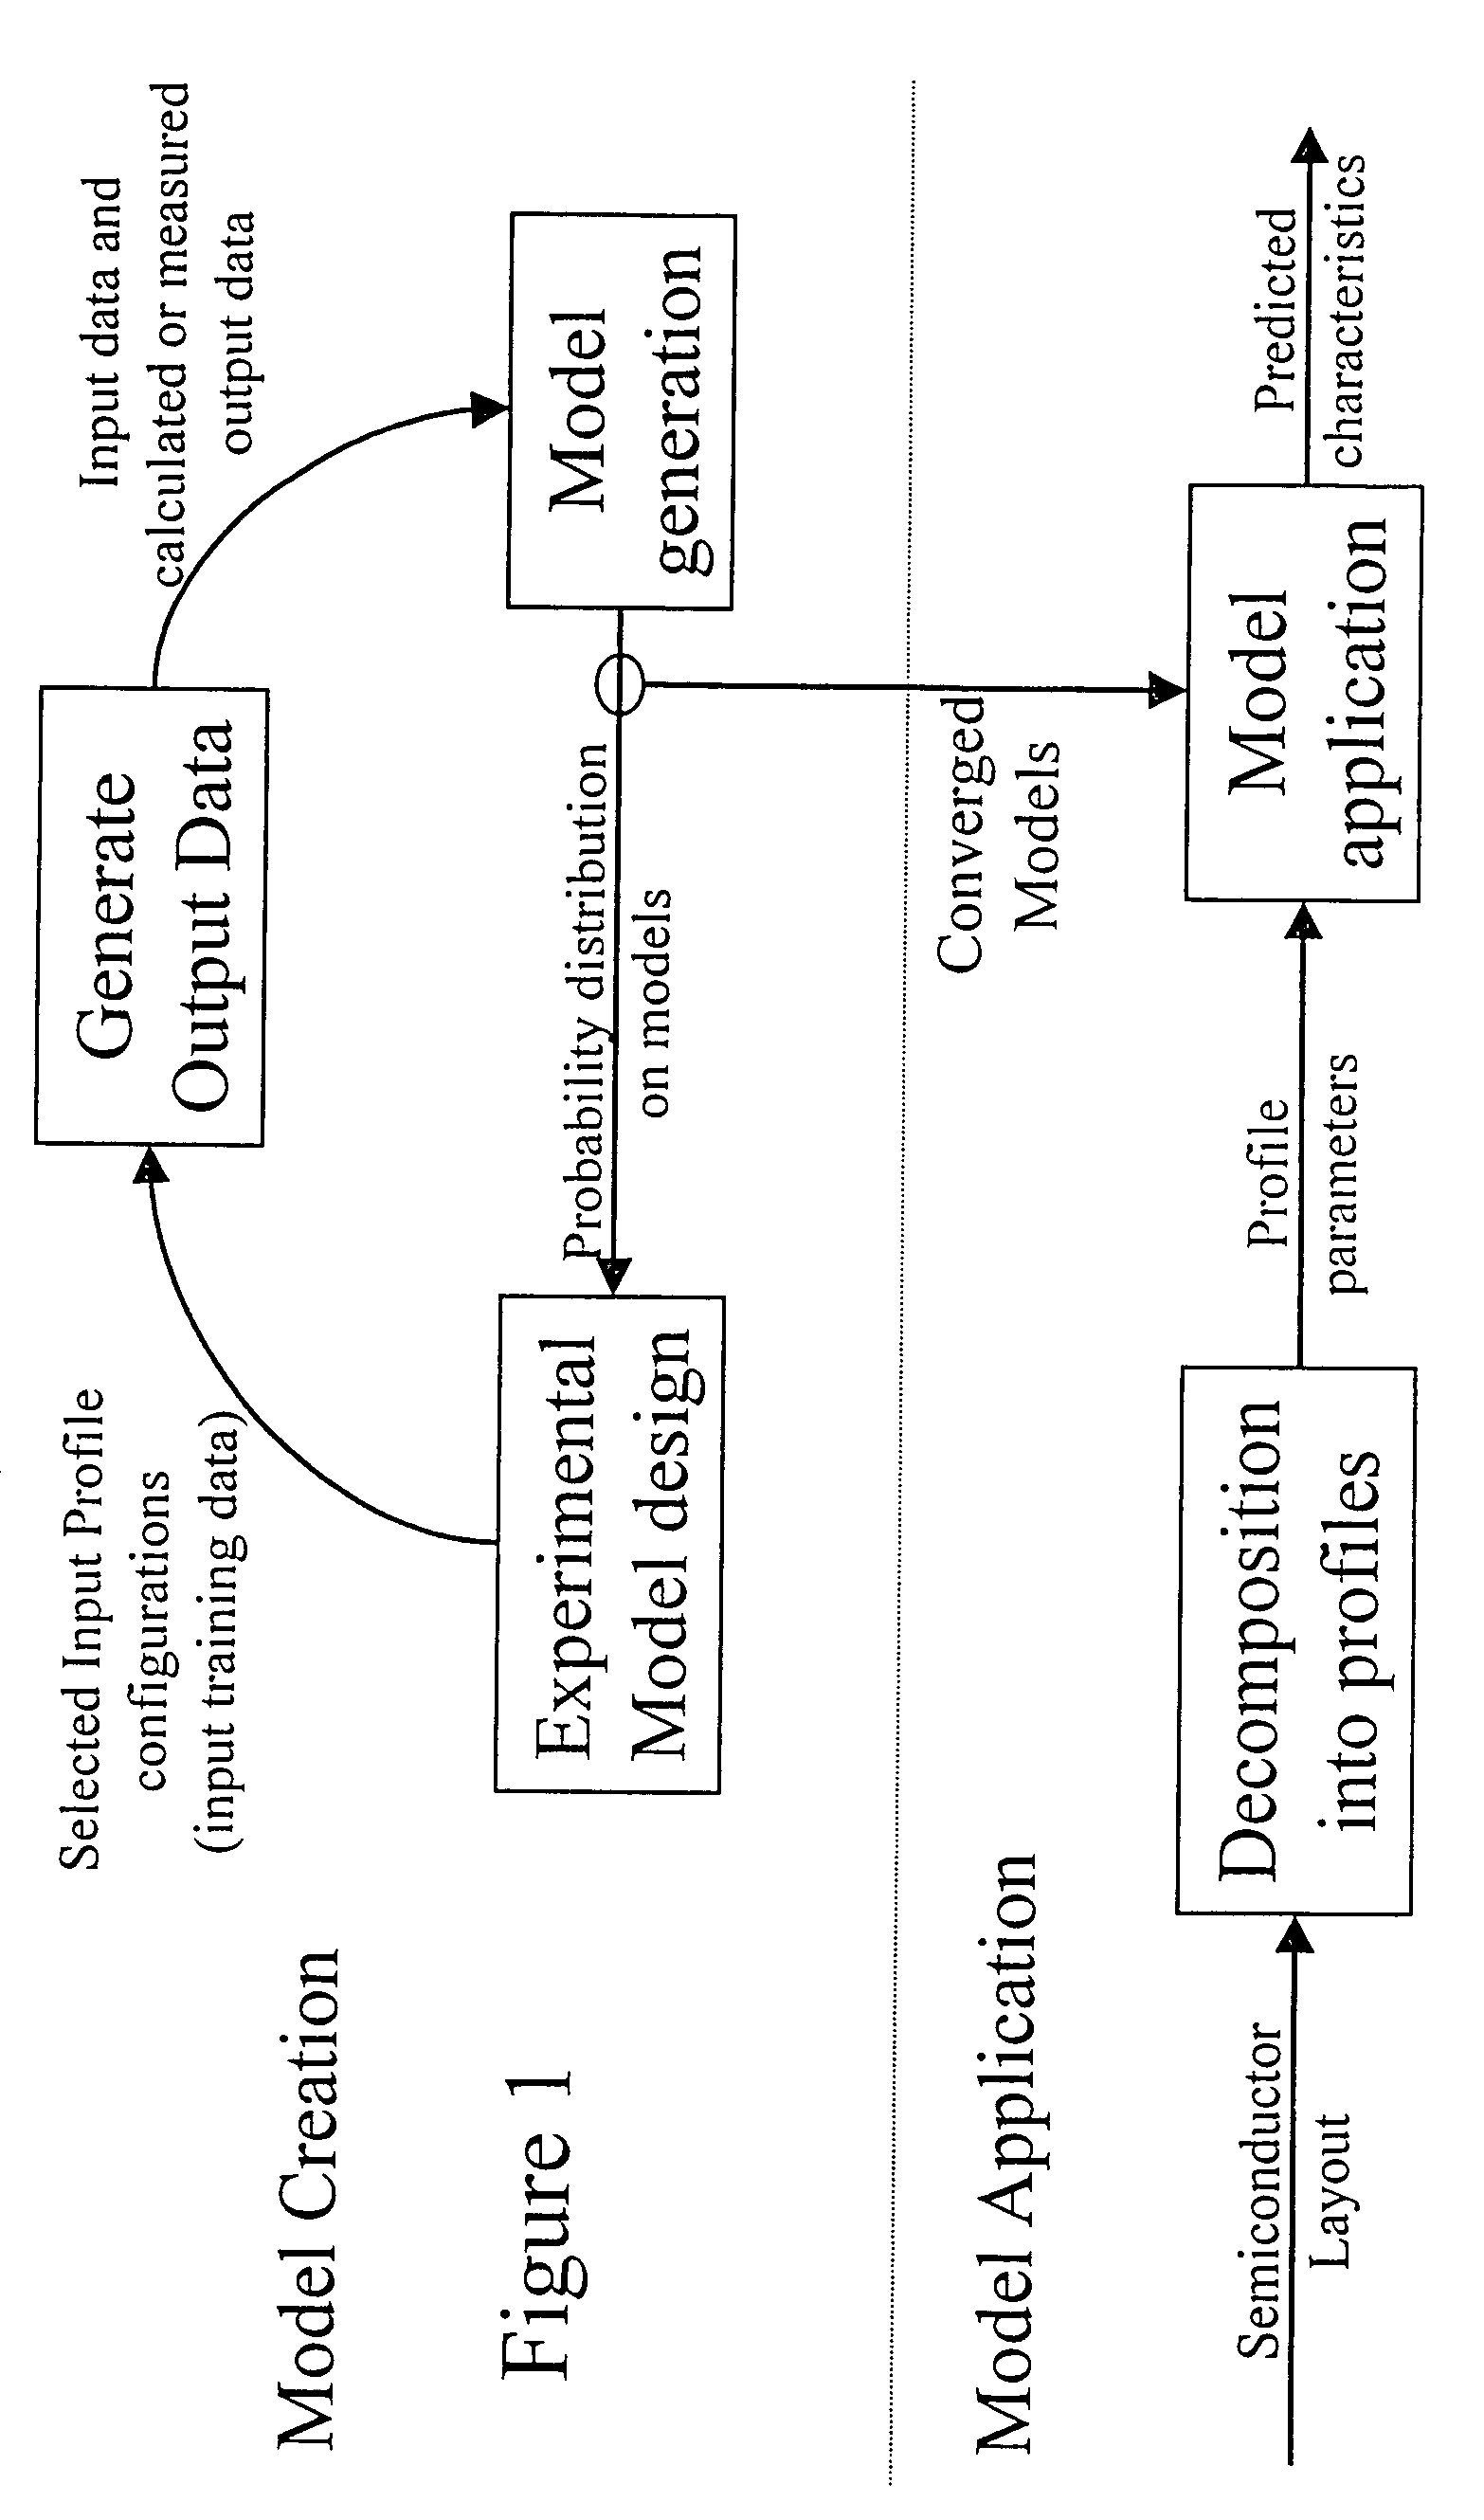 Method and apparatus for creating an extraction model using Bayesian inference implemented with the Hybrid Monte Carlo method